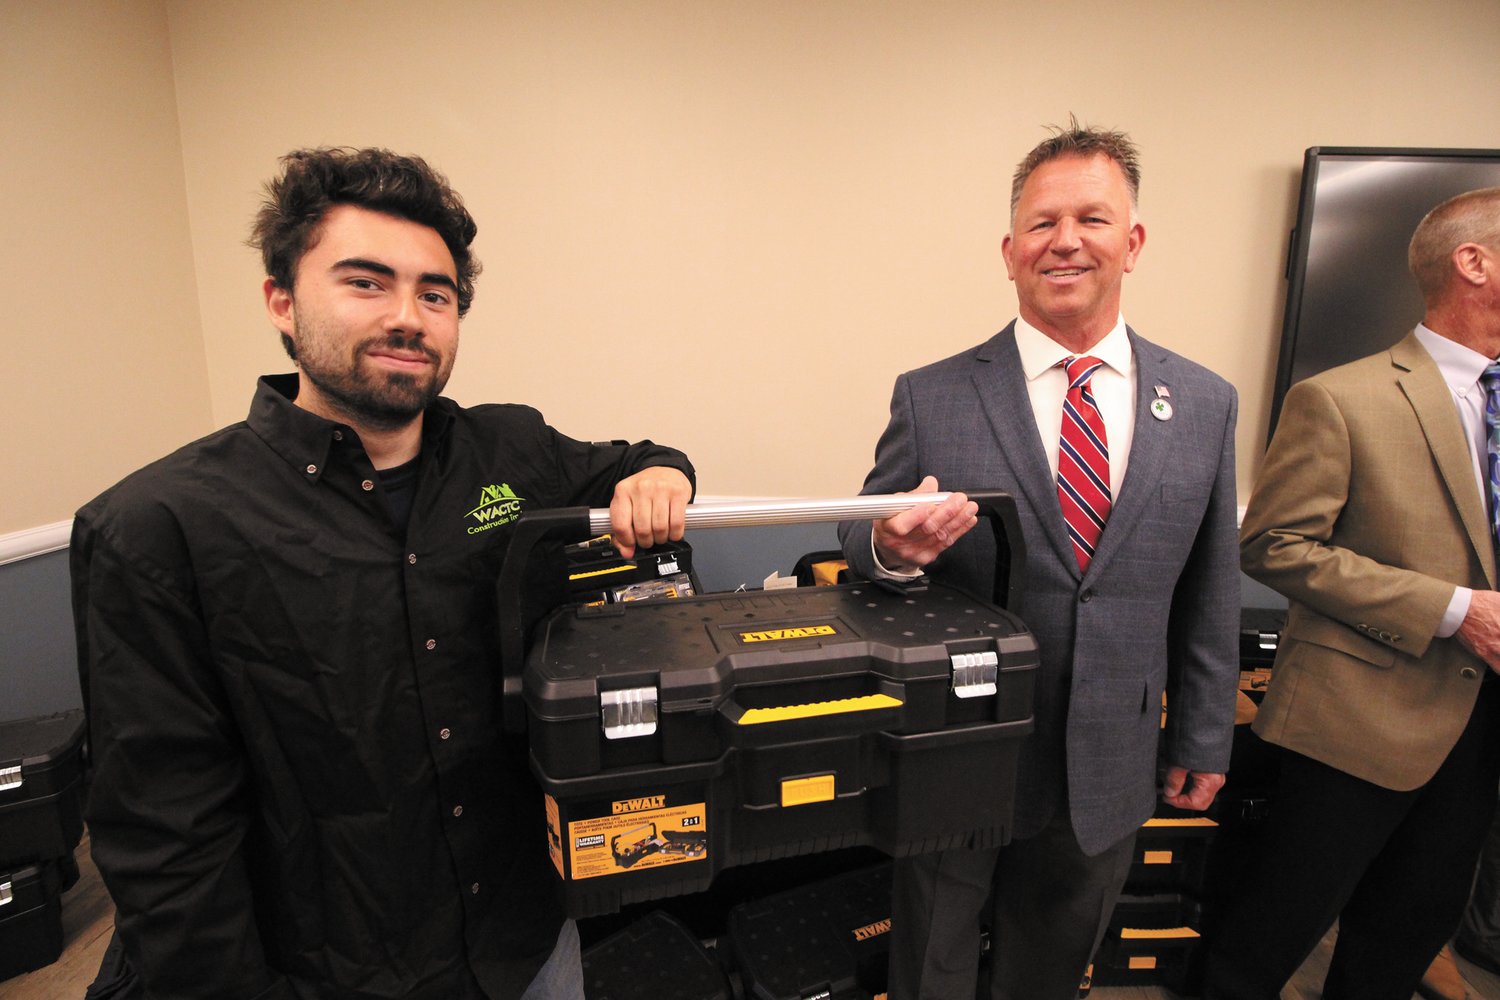 JOB READY: John Raposo of the Warwick center shows off the tool box he and other students received from Stanley Bostitch as presented by Chuck Phelps.